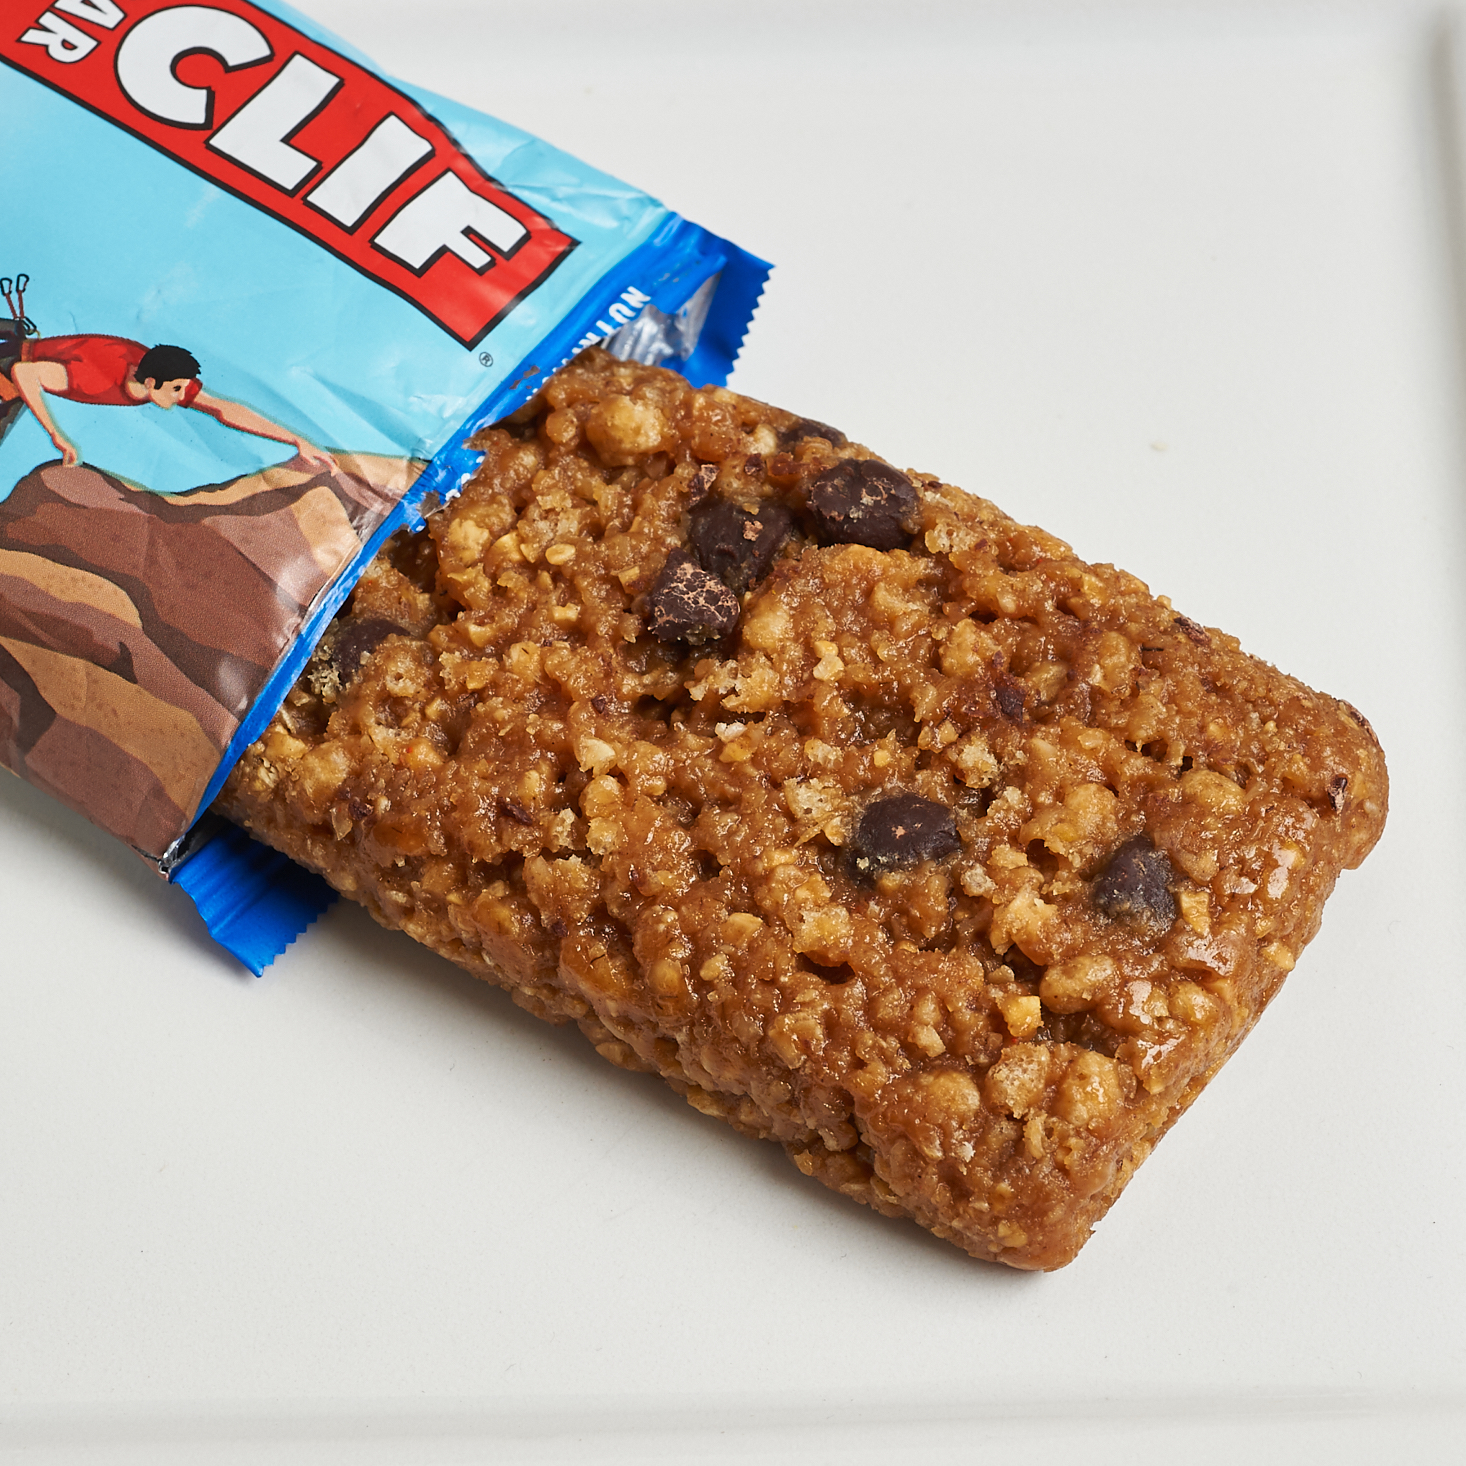 Choc chip Clif Bar coming out of package onto plate